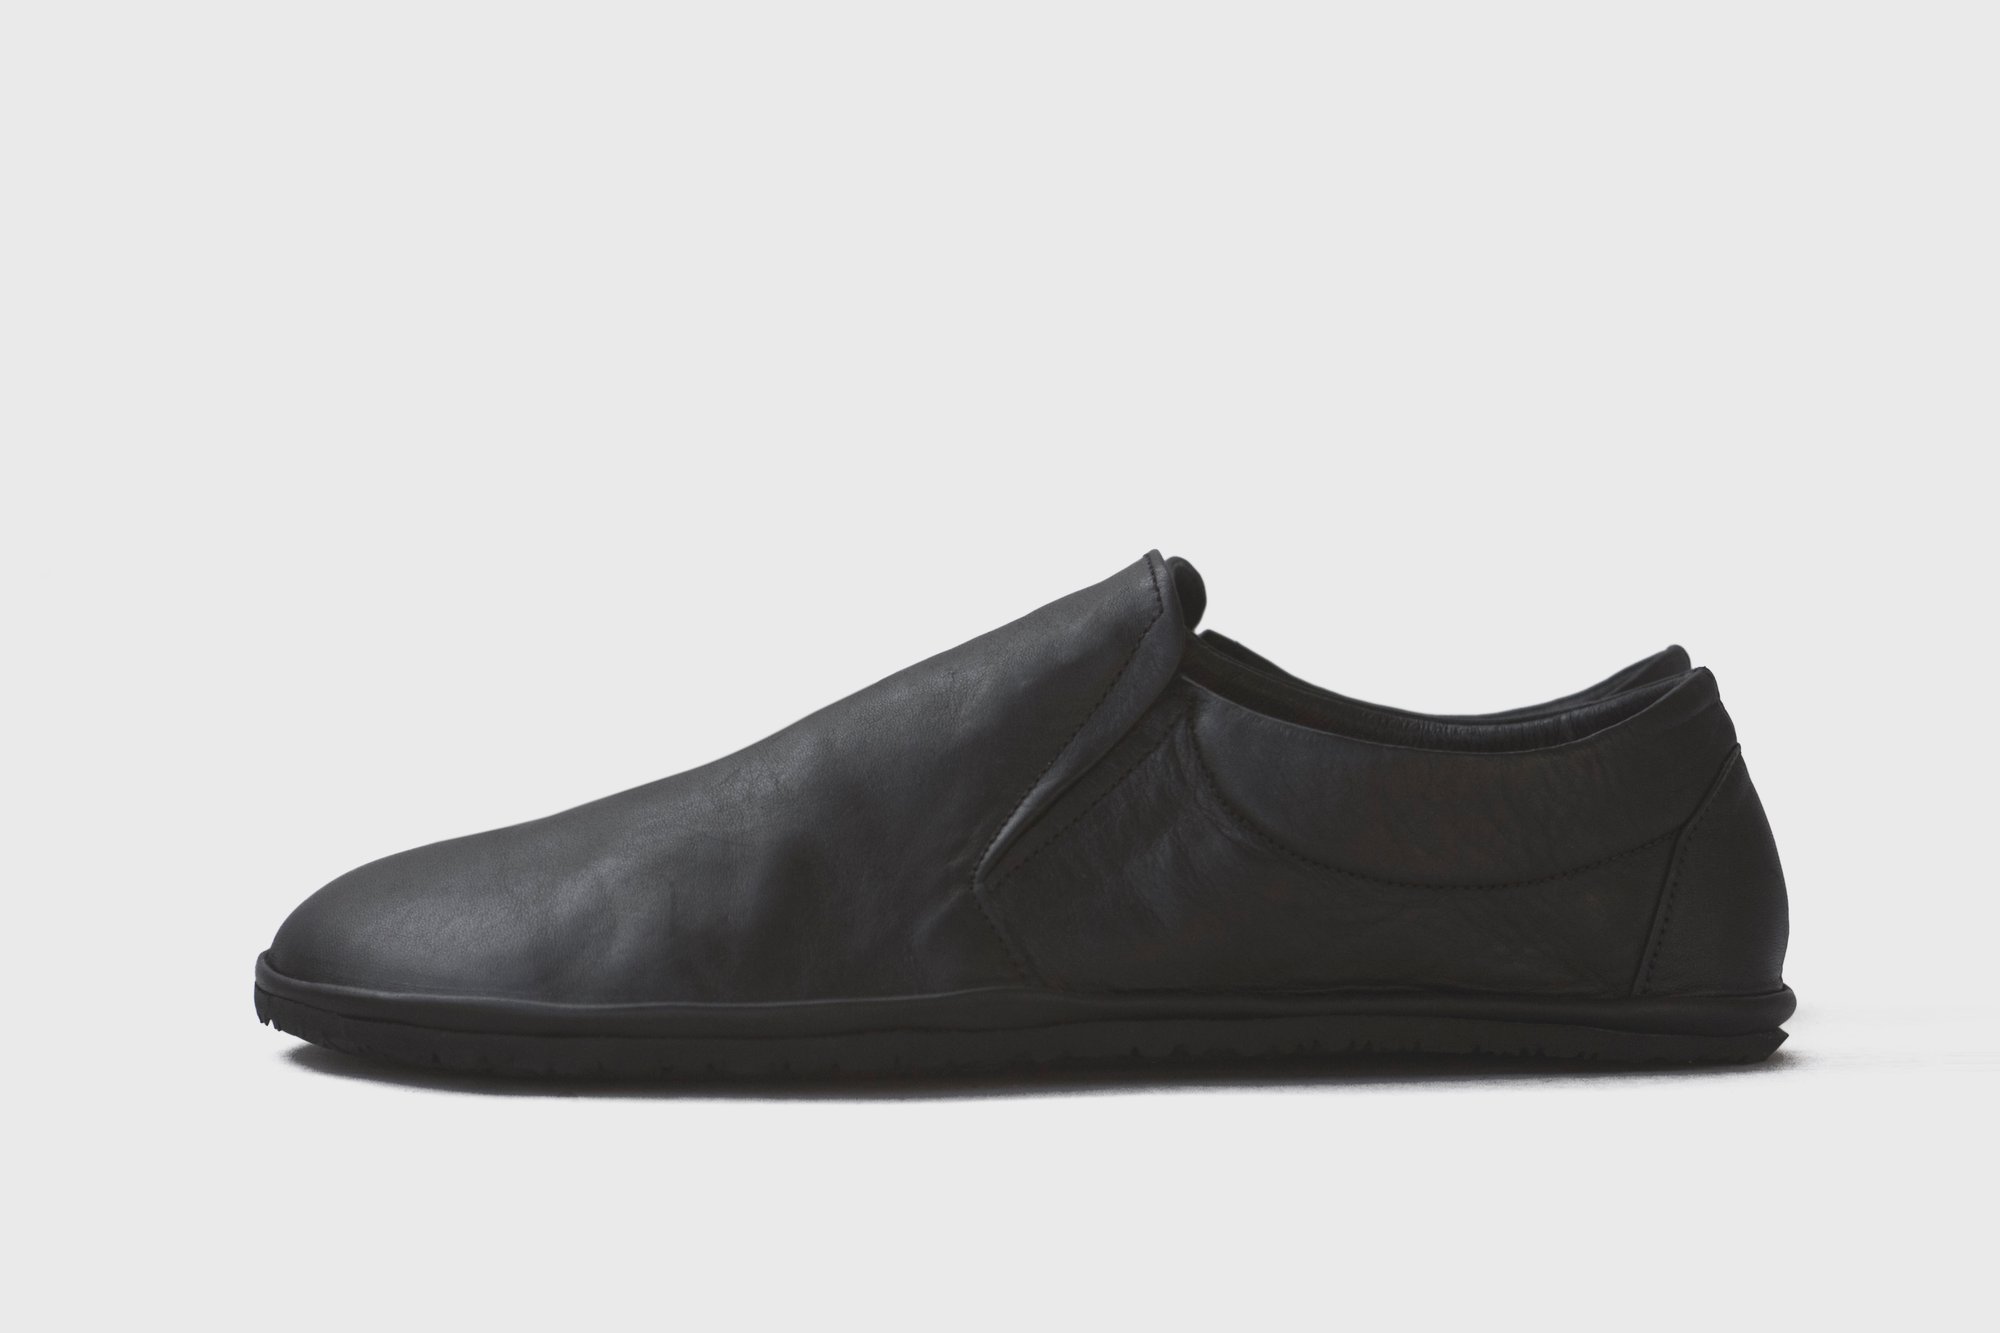 Slip-On Sneakers in Matte Black | The Drifter Leather handmade shoes